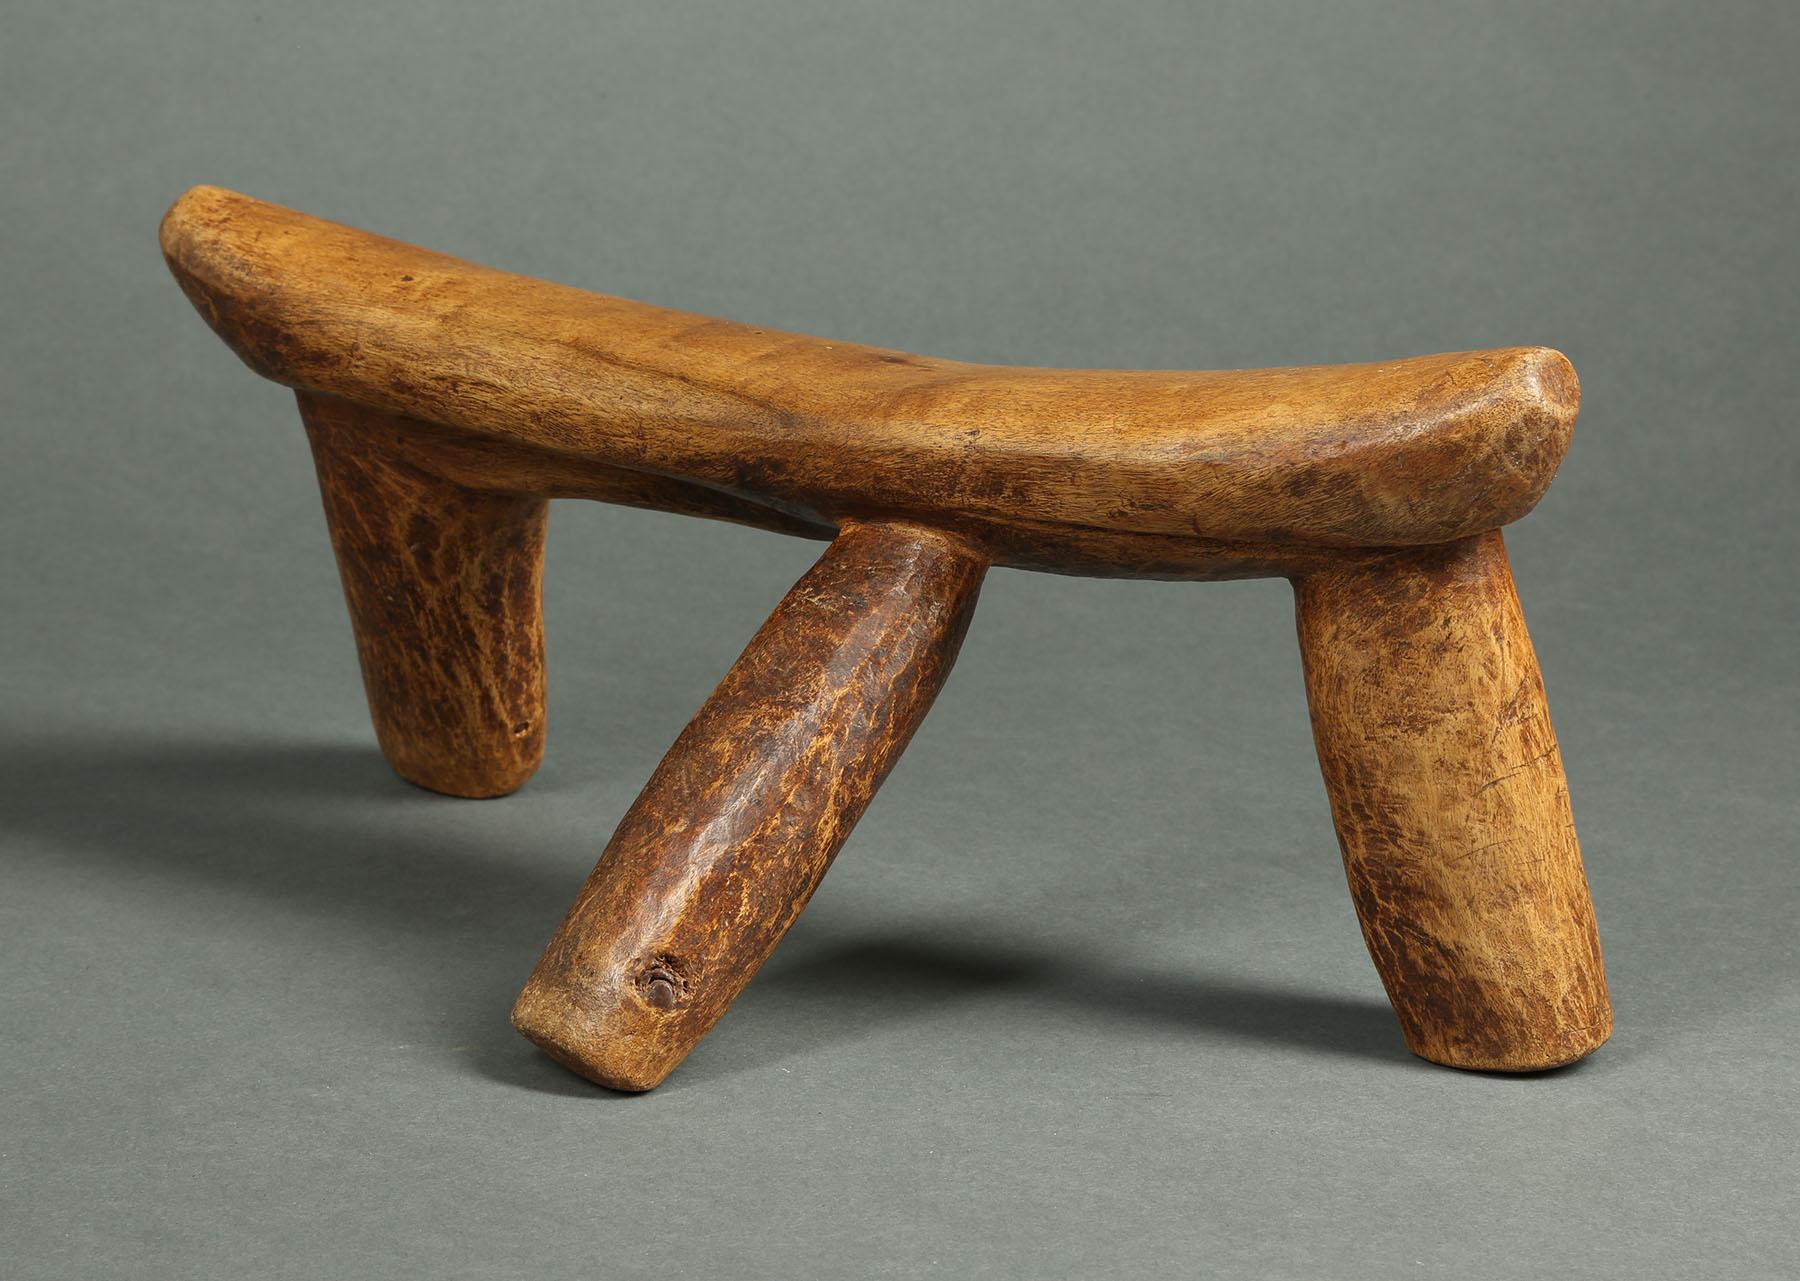 Carved wood tribal three leg headrest, Kenya

A wonderful, worn used three leg headrest from Kenya, about 14 inches long.